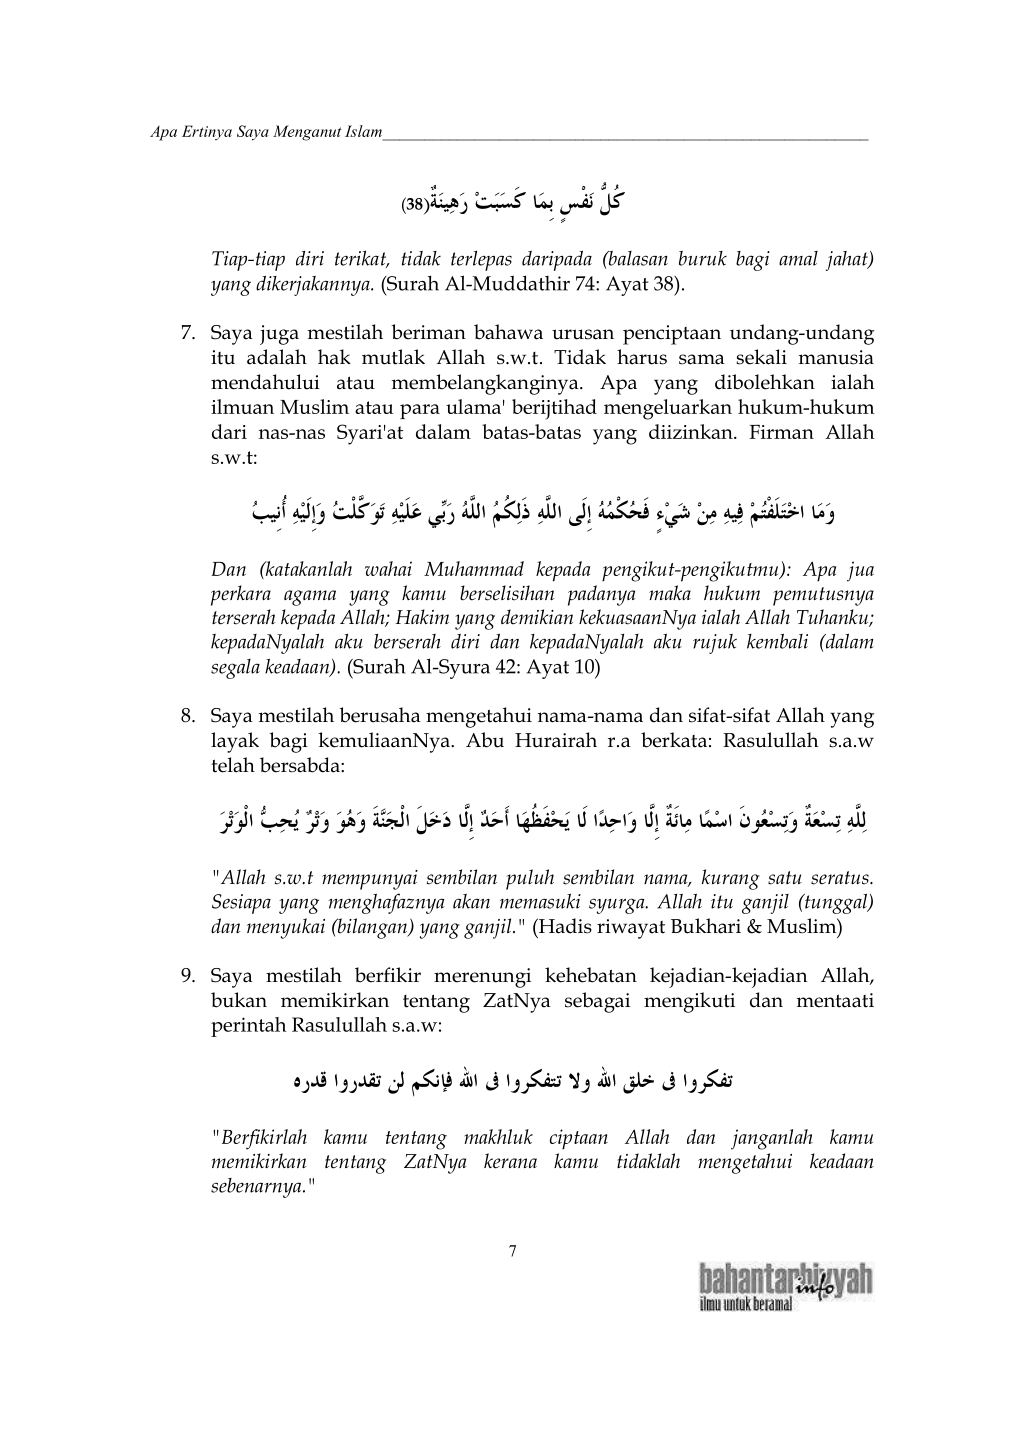 page 7